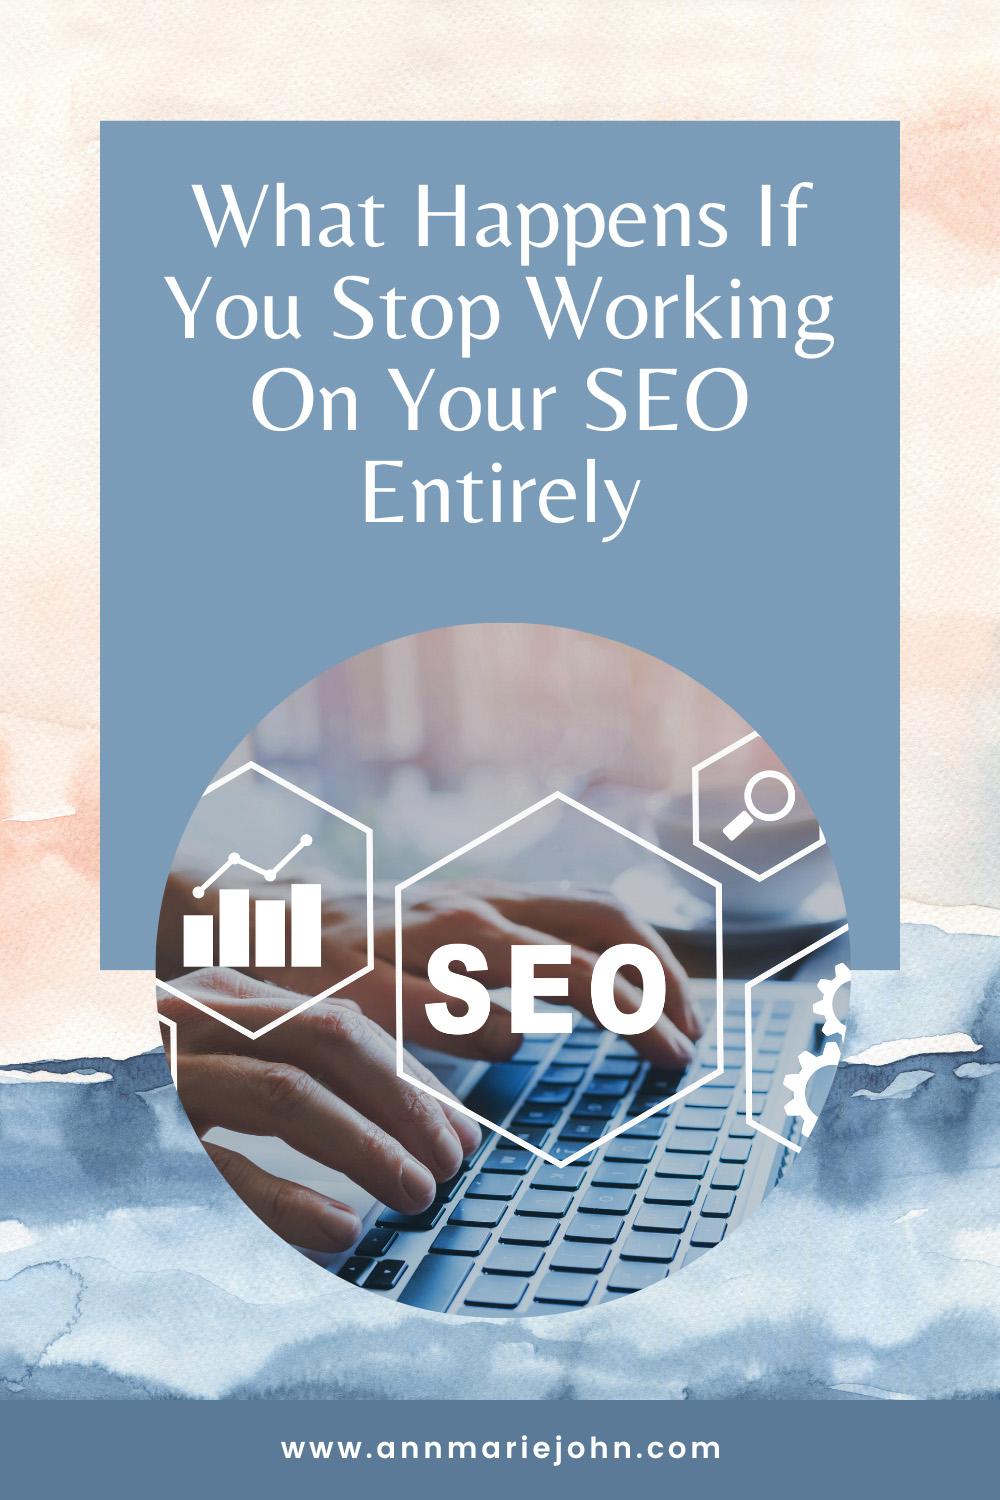 What Happens If You Stop Working On Your SEO Entirely